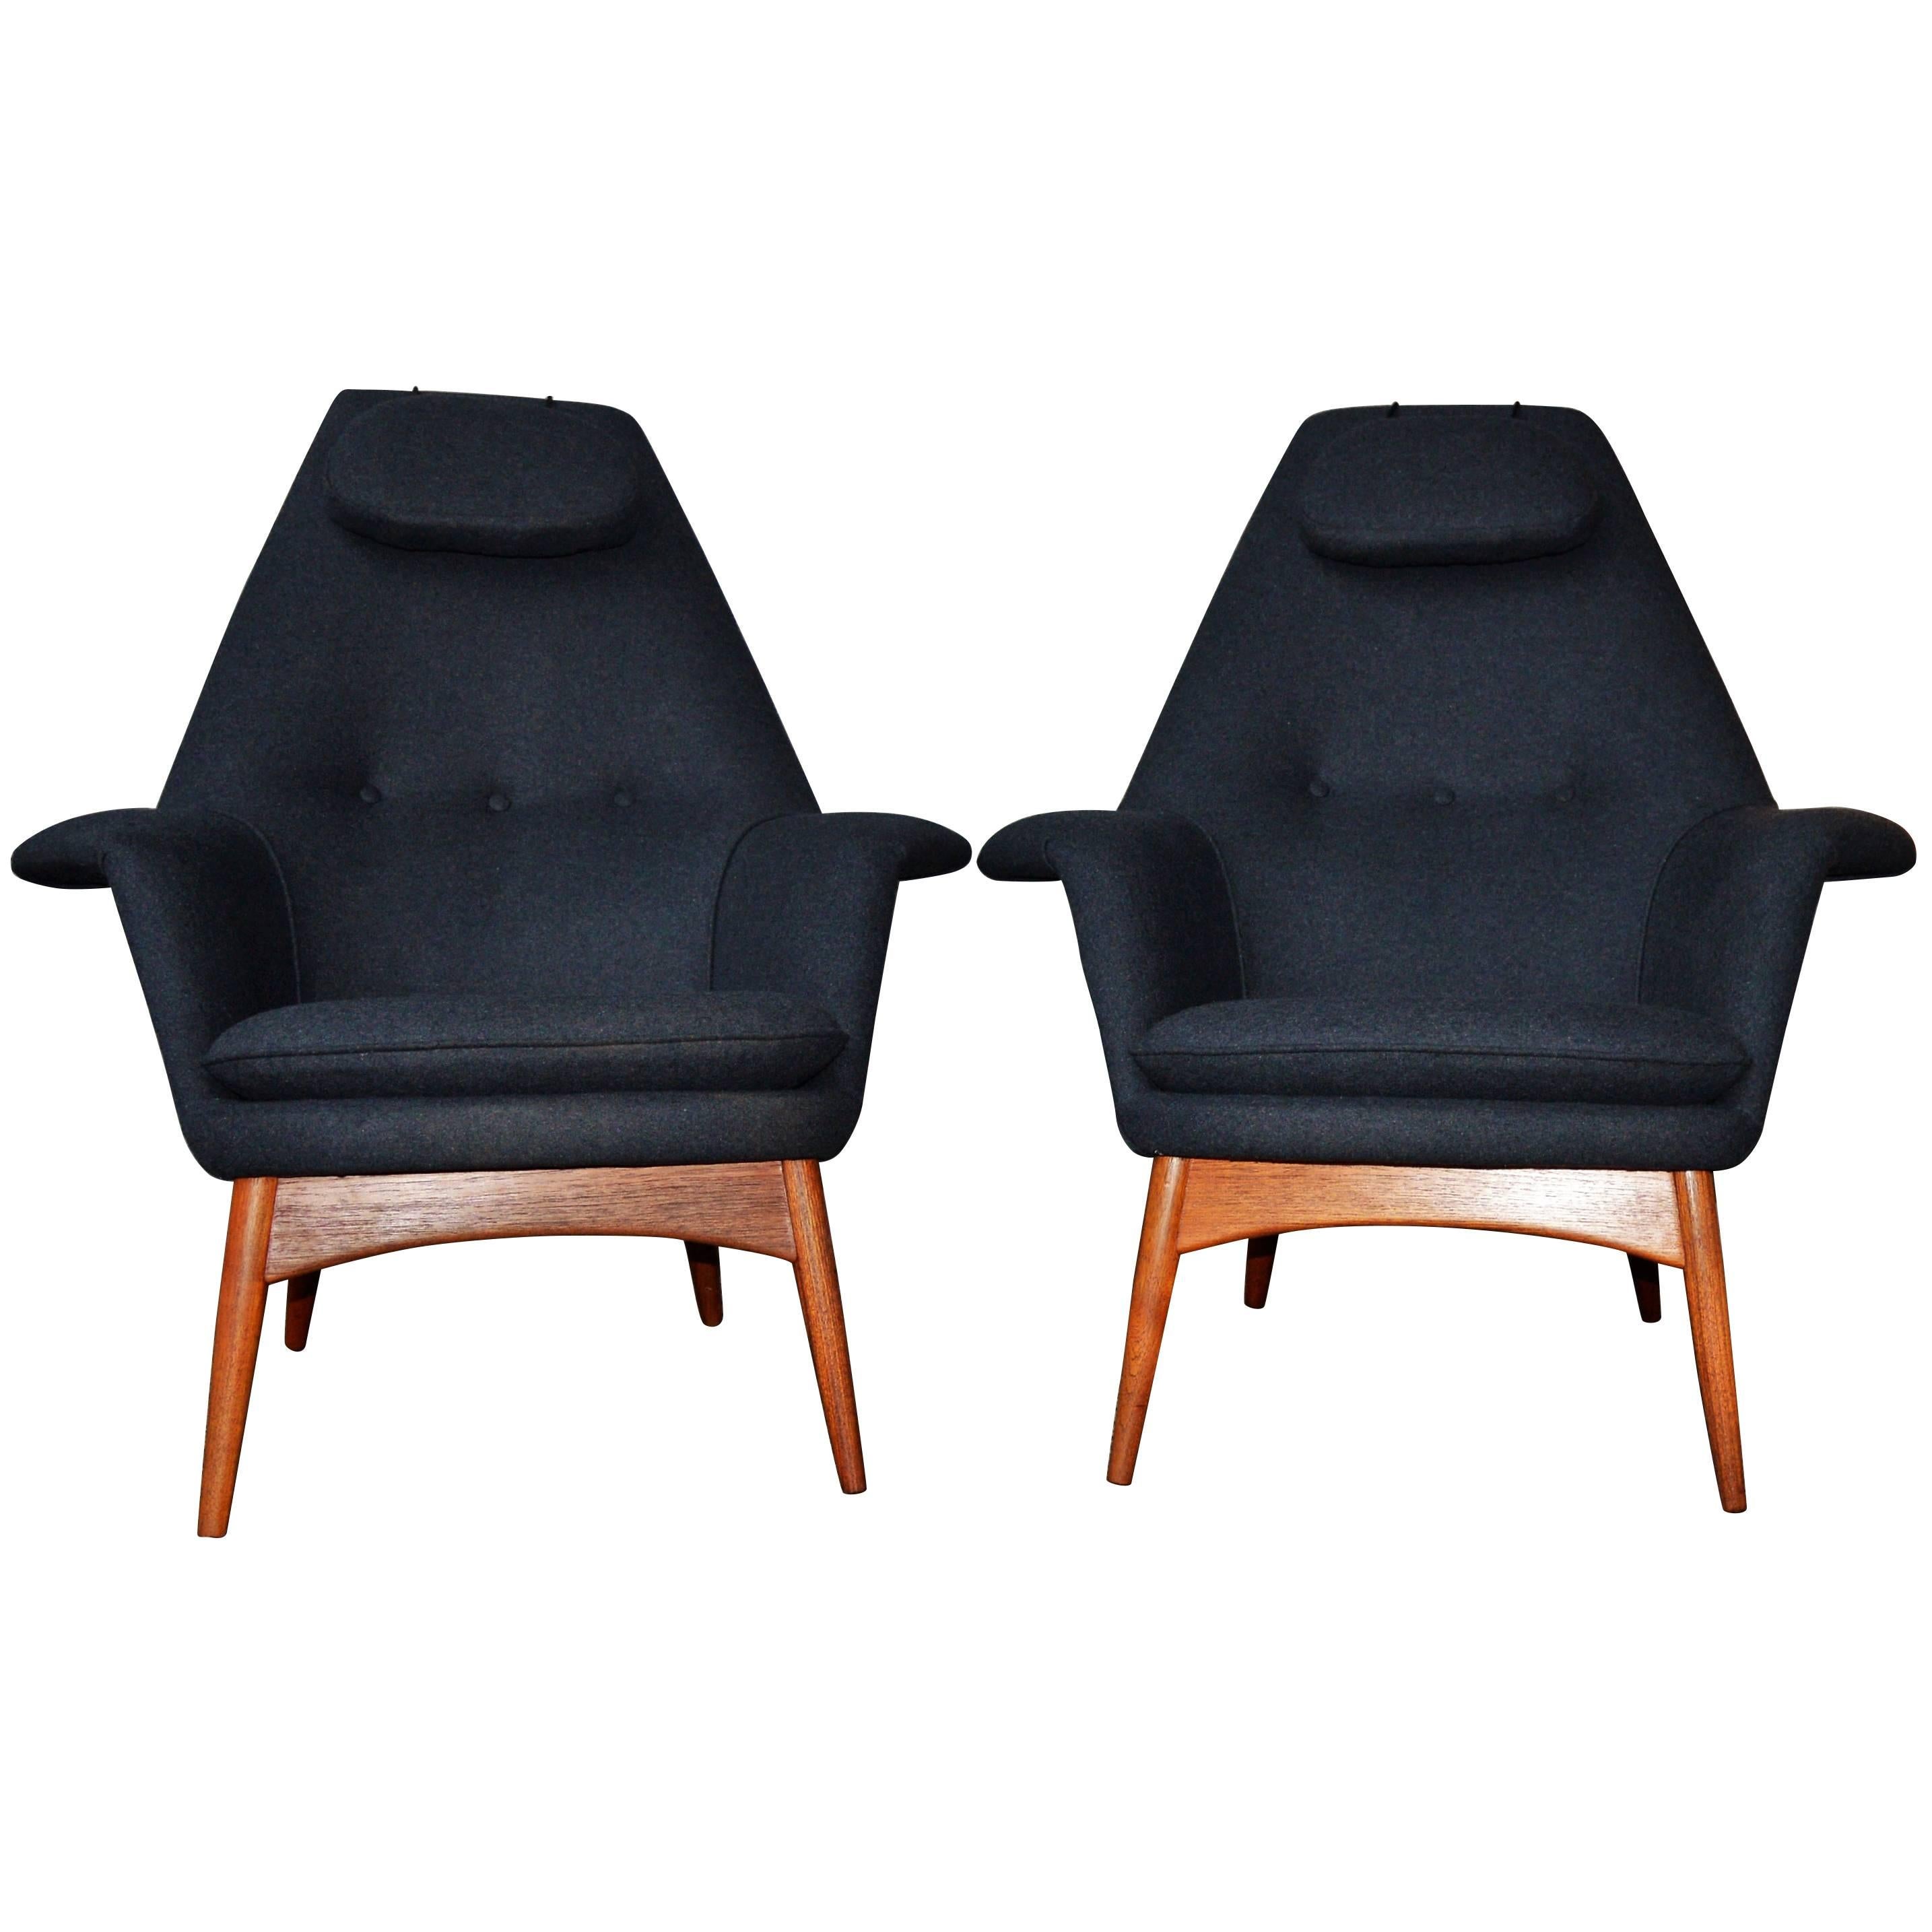 Pair of Teak Manta Ray Chairs in Charcoal Wool by Bjorn Engo for DUX